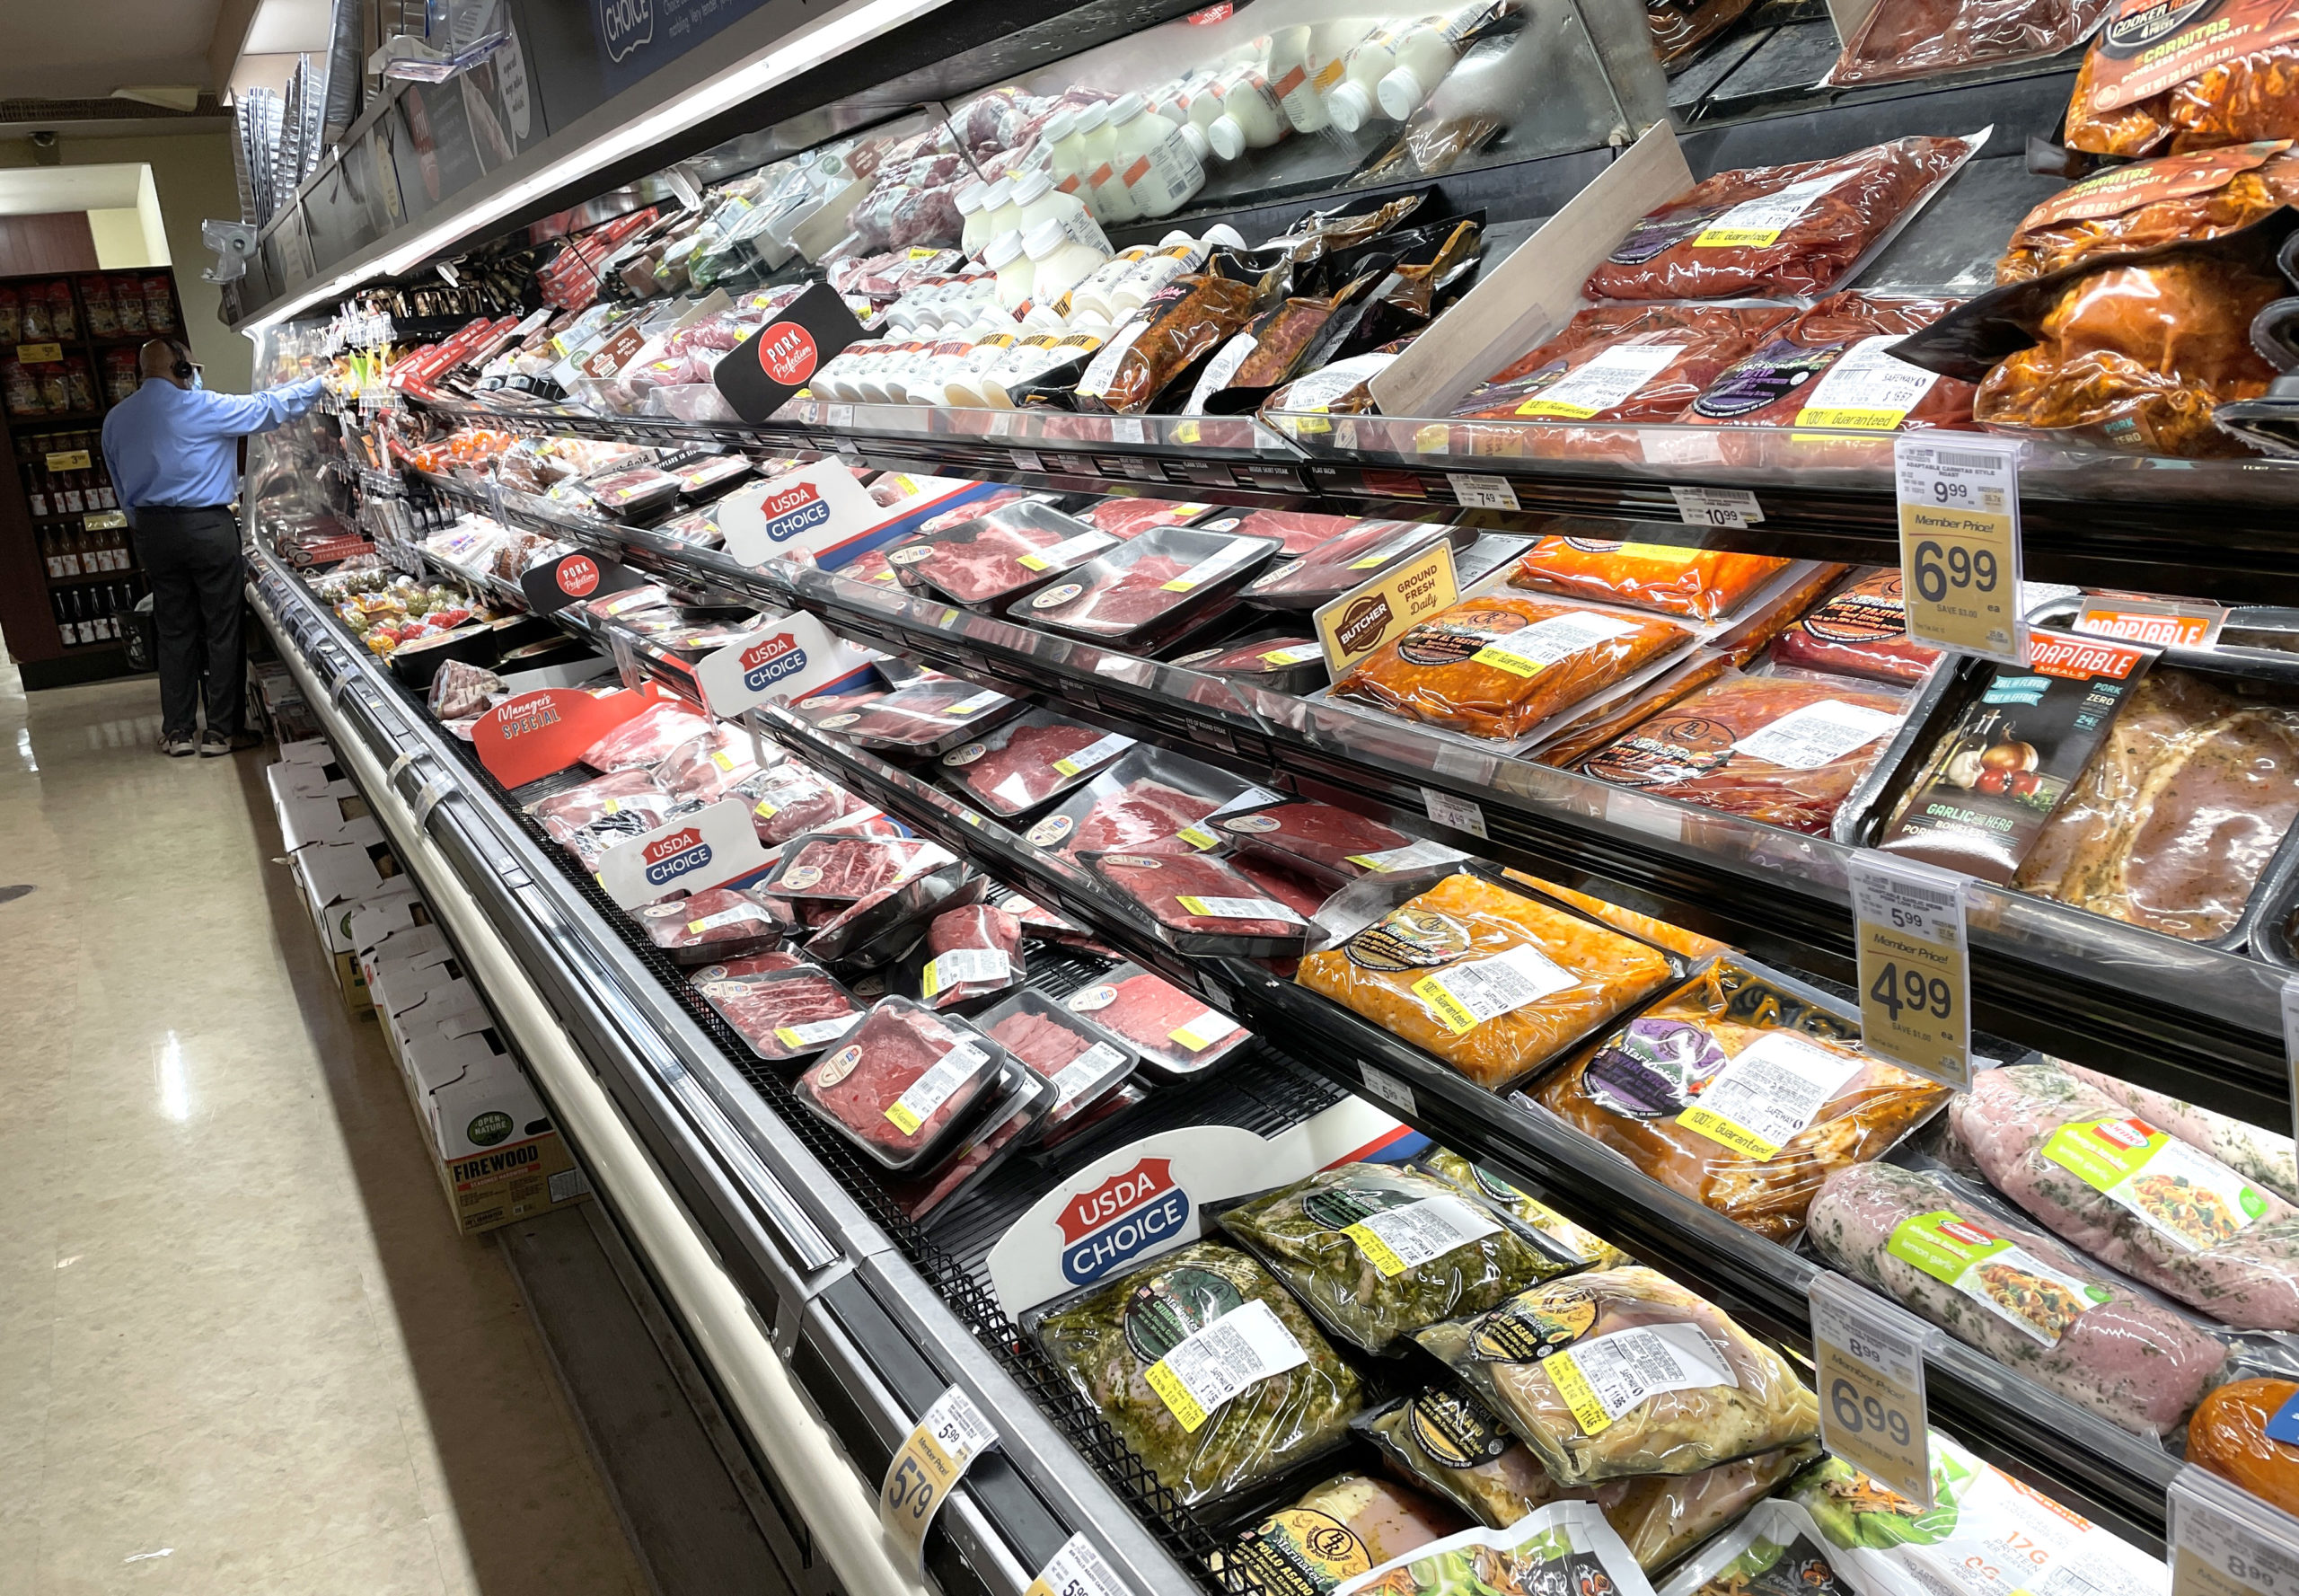 SAN FRANCISCO, CALIFORNIA - OCTOBER 04: A customer shops for meat at a Safeway store on October 04, 2021 in San Francisco, California. The price for meat at the grocery stores has surged over the past year with beef jumping 12.2%, pork 9.8% and chicken up 7.2% since last year. (Photo by Justin Sullivan/Getty Images)